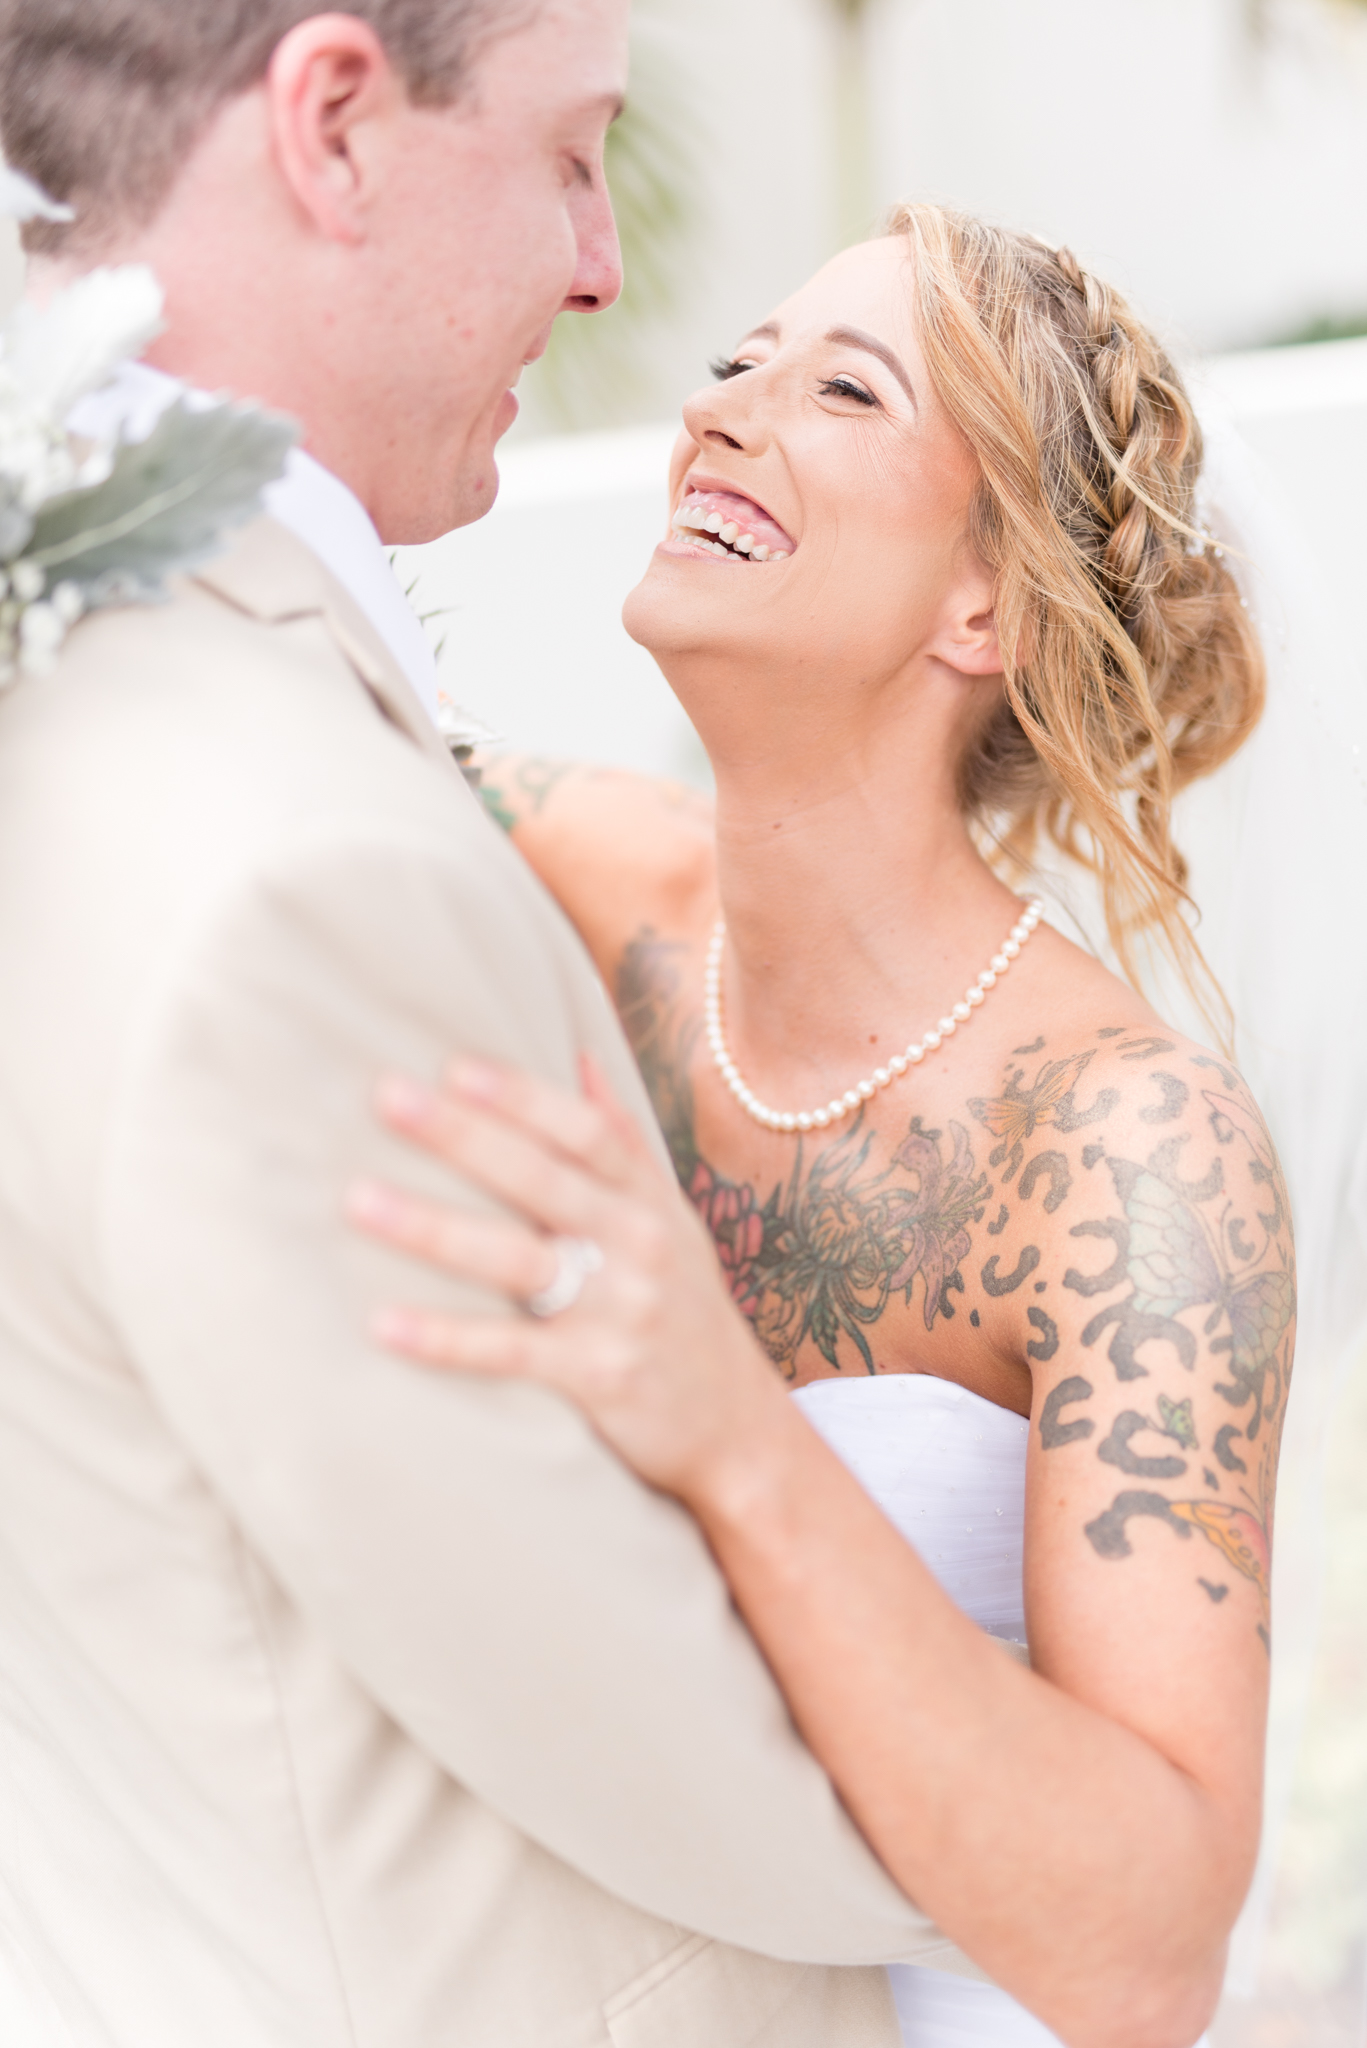 Bride laughs with groom.